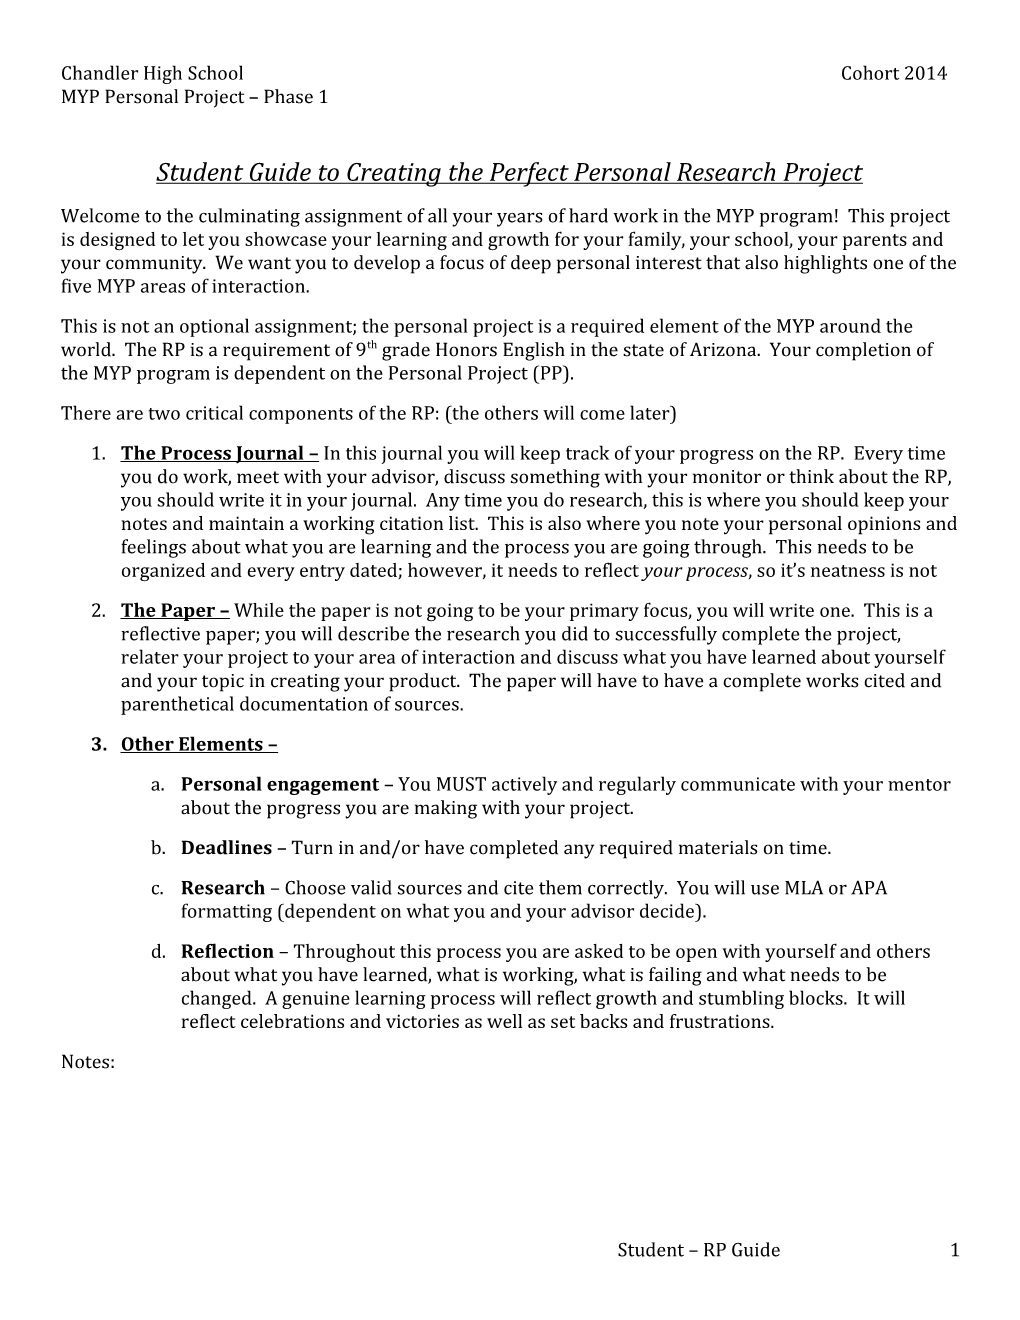 Student Guide to Creating the Perfect Personal Project